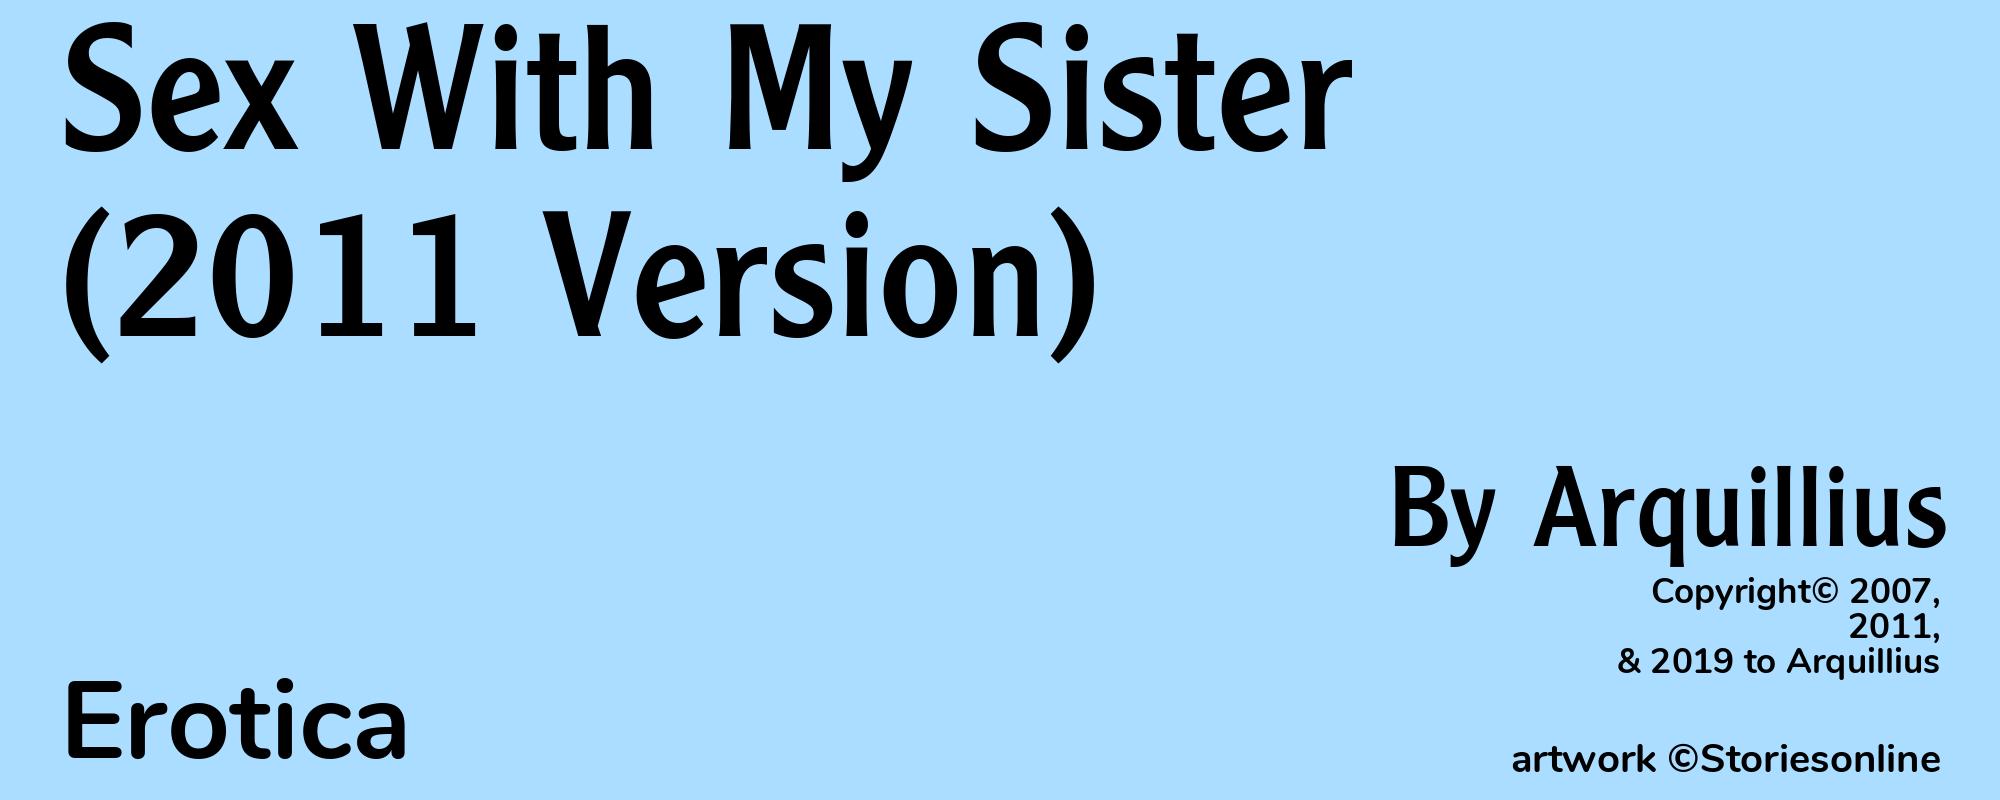 Sex With My Sister (2011 Version) - Cover